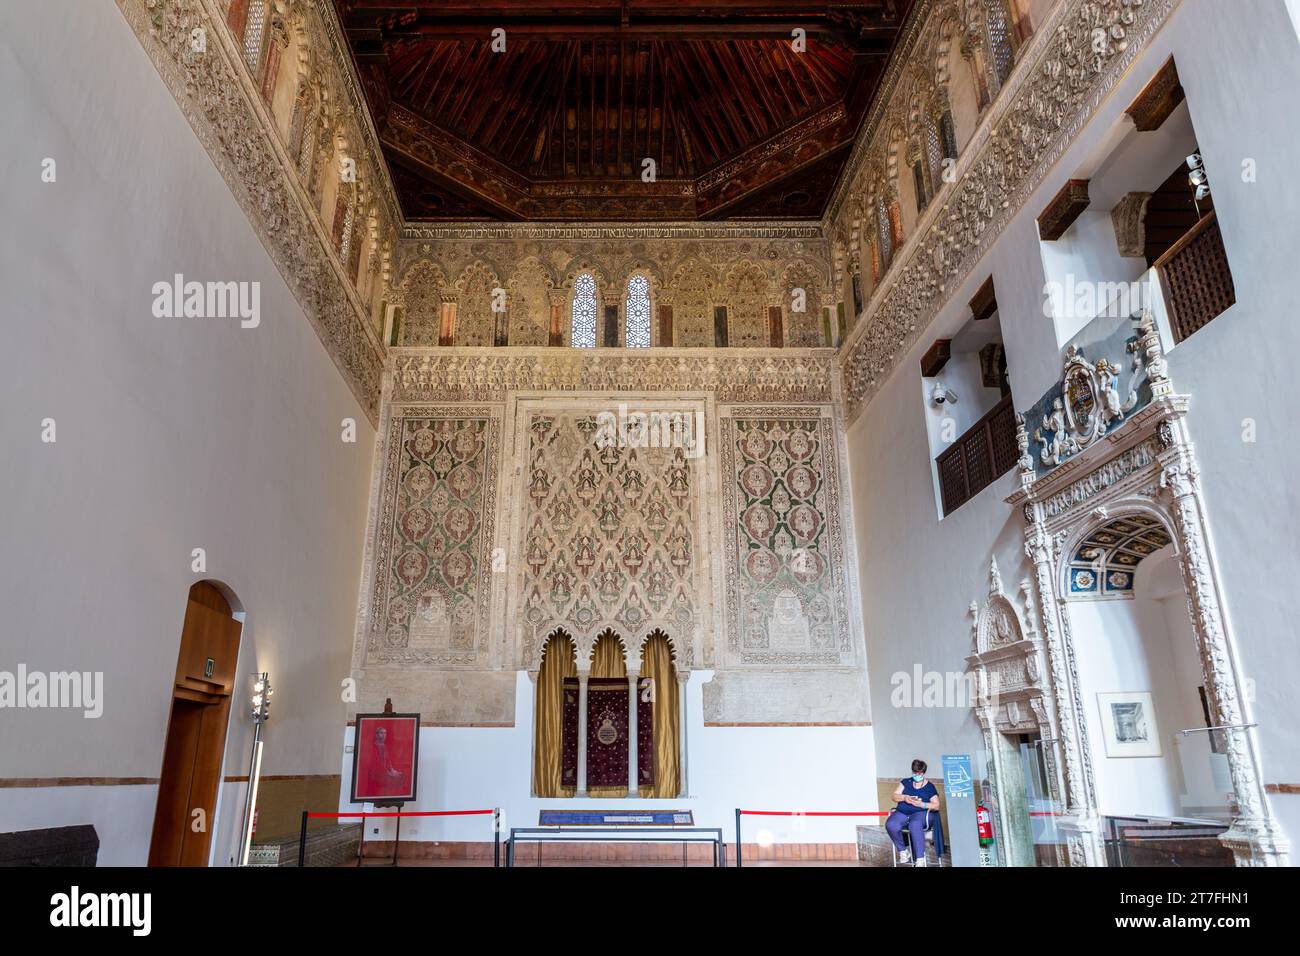 Toledo, Spain, 08.10.21. Synagogue of El Transito (now Sephardic Museum), Islamic-inspired prayer hall with altar and Holy Ark. Stock Photo